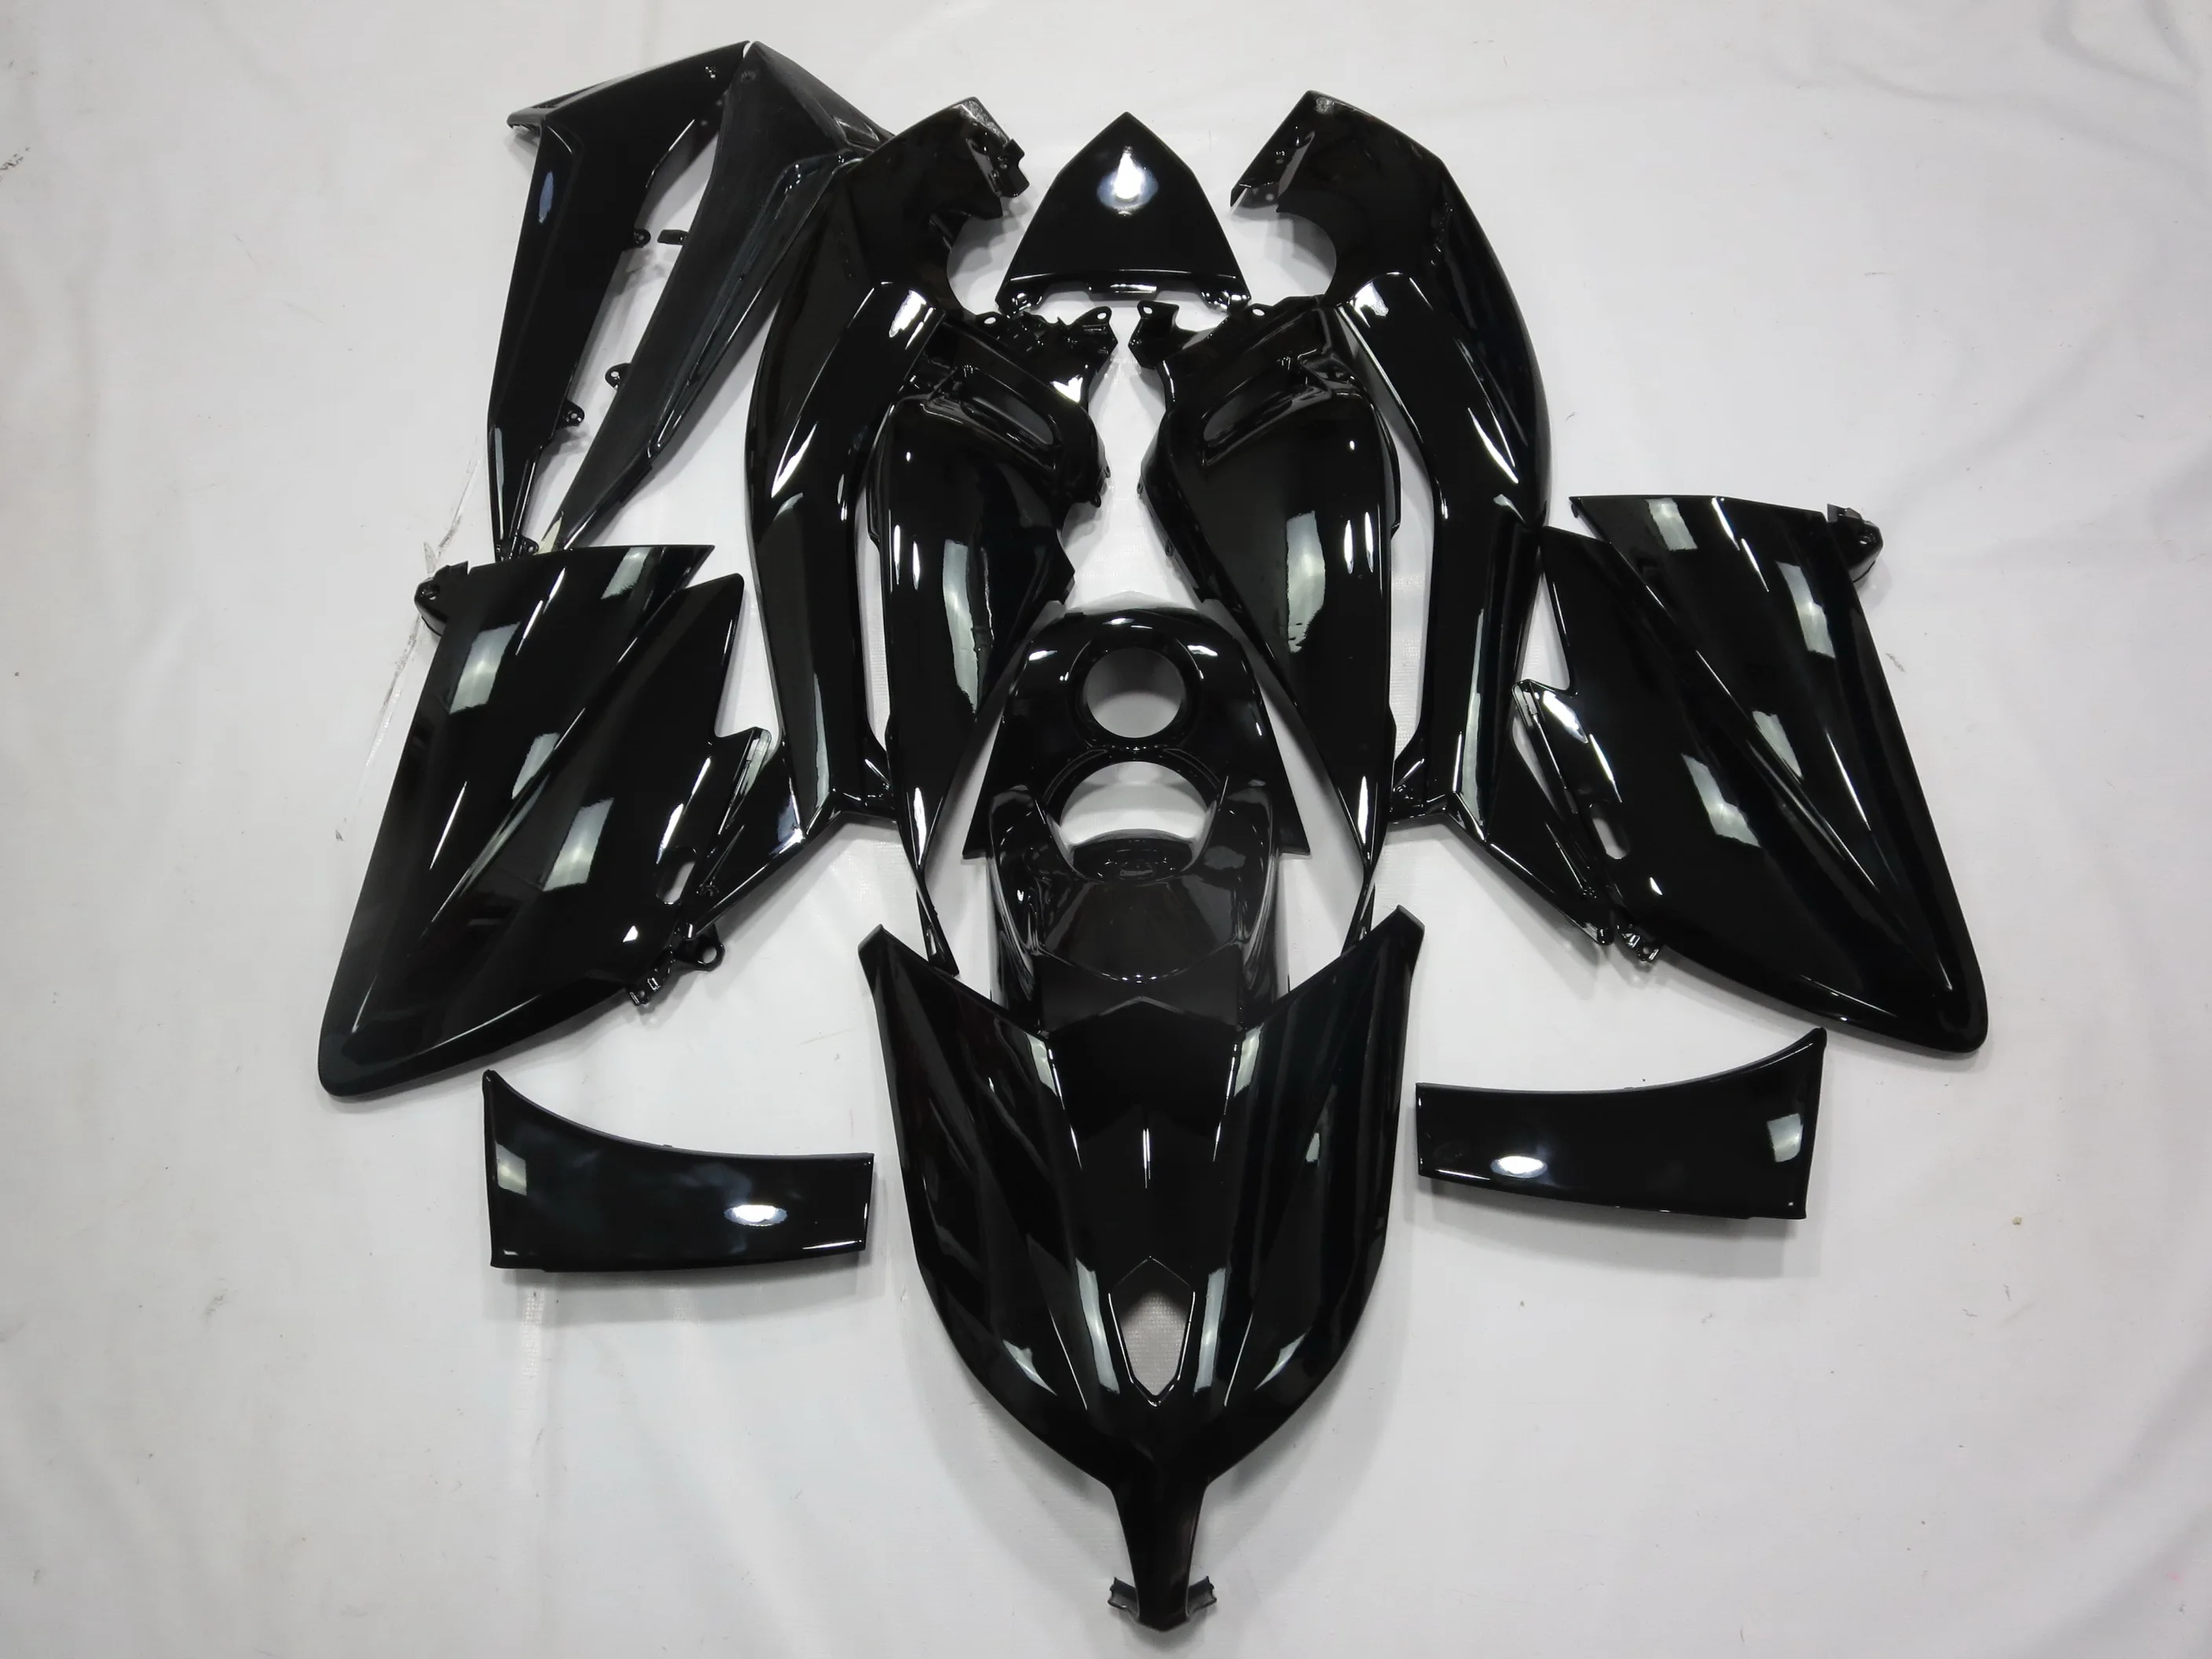 

for Motorcycle ABS Plastic Injection Fairing Kit Bodywork Bolts for T-MAX tmax530 Tmax 530 2012-2014 good uv painted